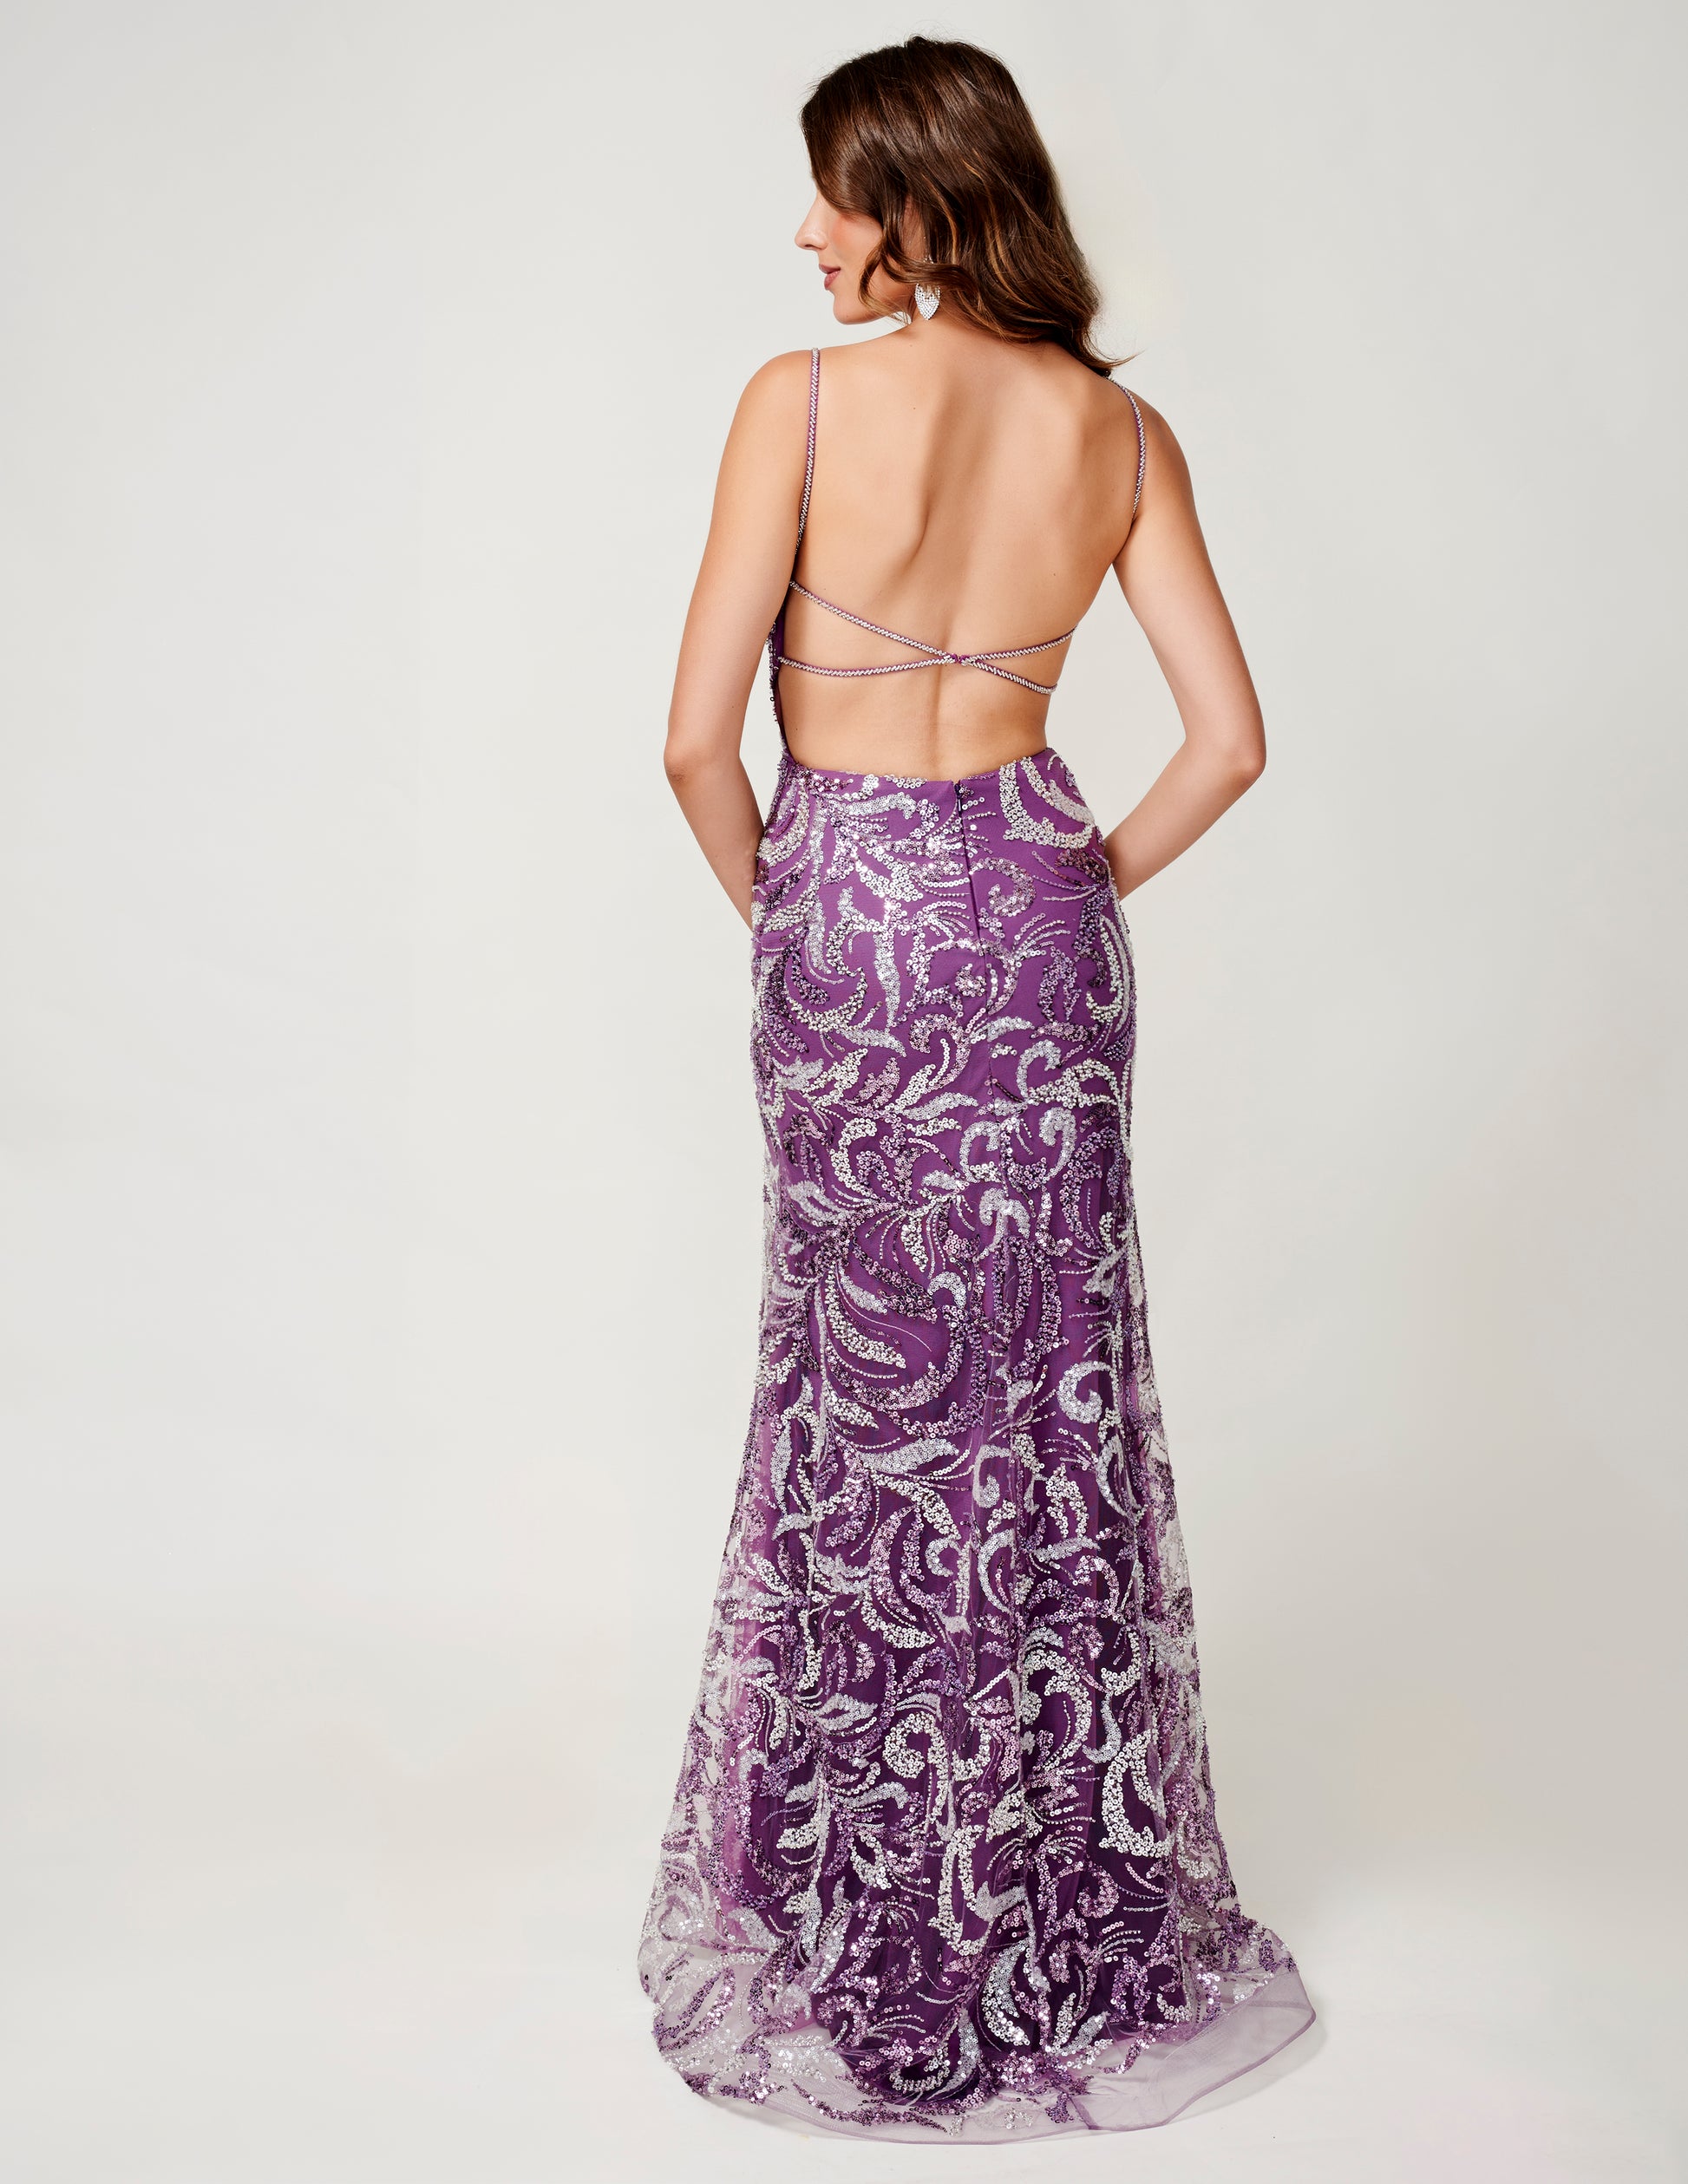 Nina Canacci presents an elegant formal dress for your next special occasion. With intricate beaded and sequin details, this backless gown features a stunning v-neck and thigh-high slit for a touch of glamour. Make a statement at prom or any evening event with this show-stopping design.